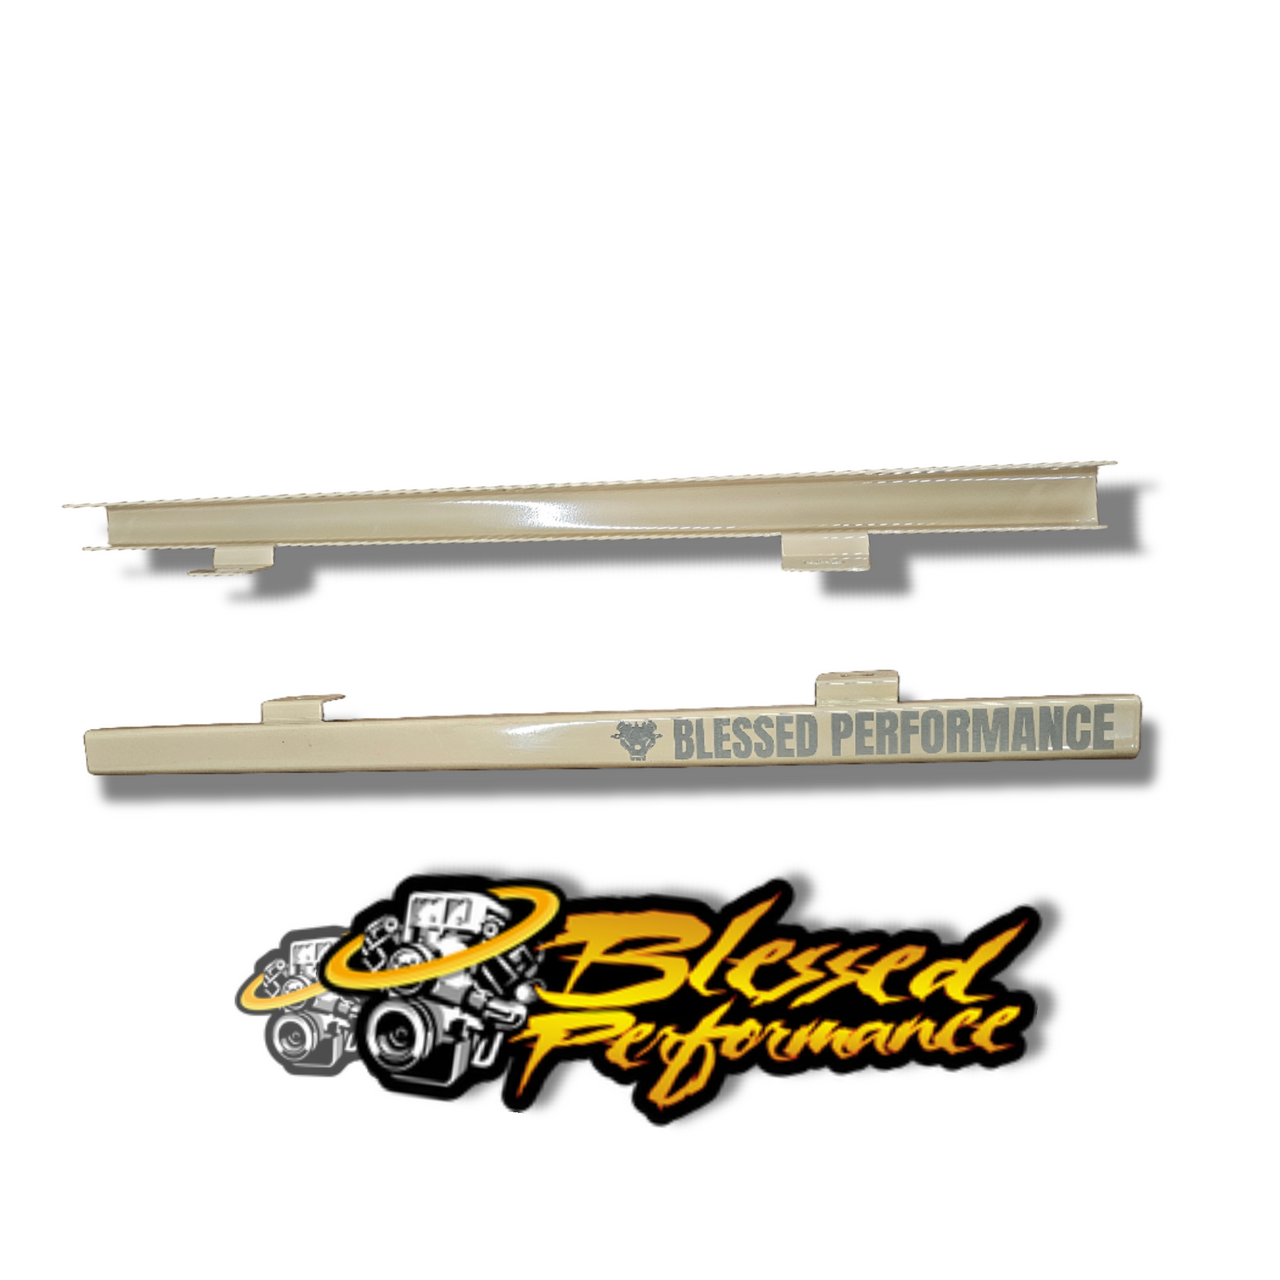 Blessed Performance HD Aluminum Wire Loom 1999-2007 Ford F250/F350/F450/F550 Army Tan View